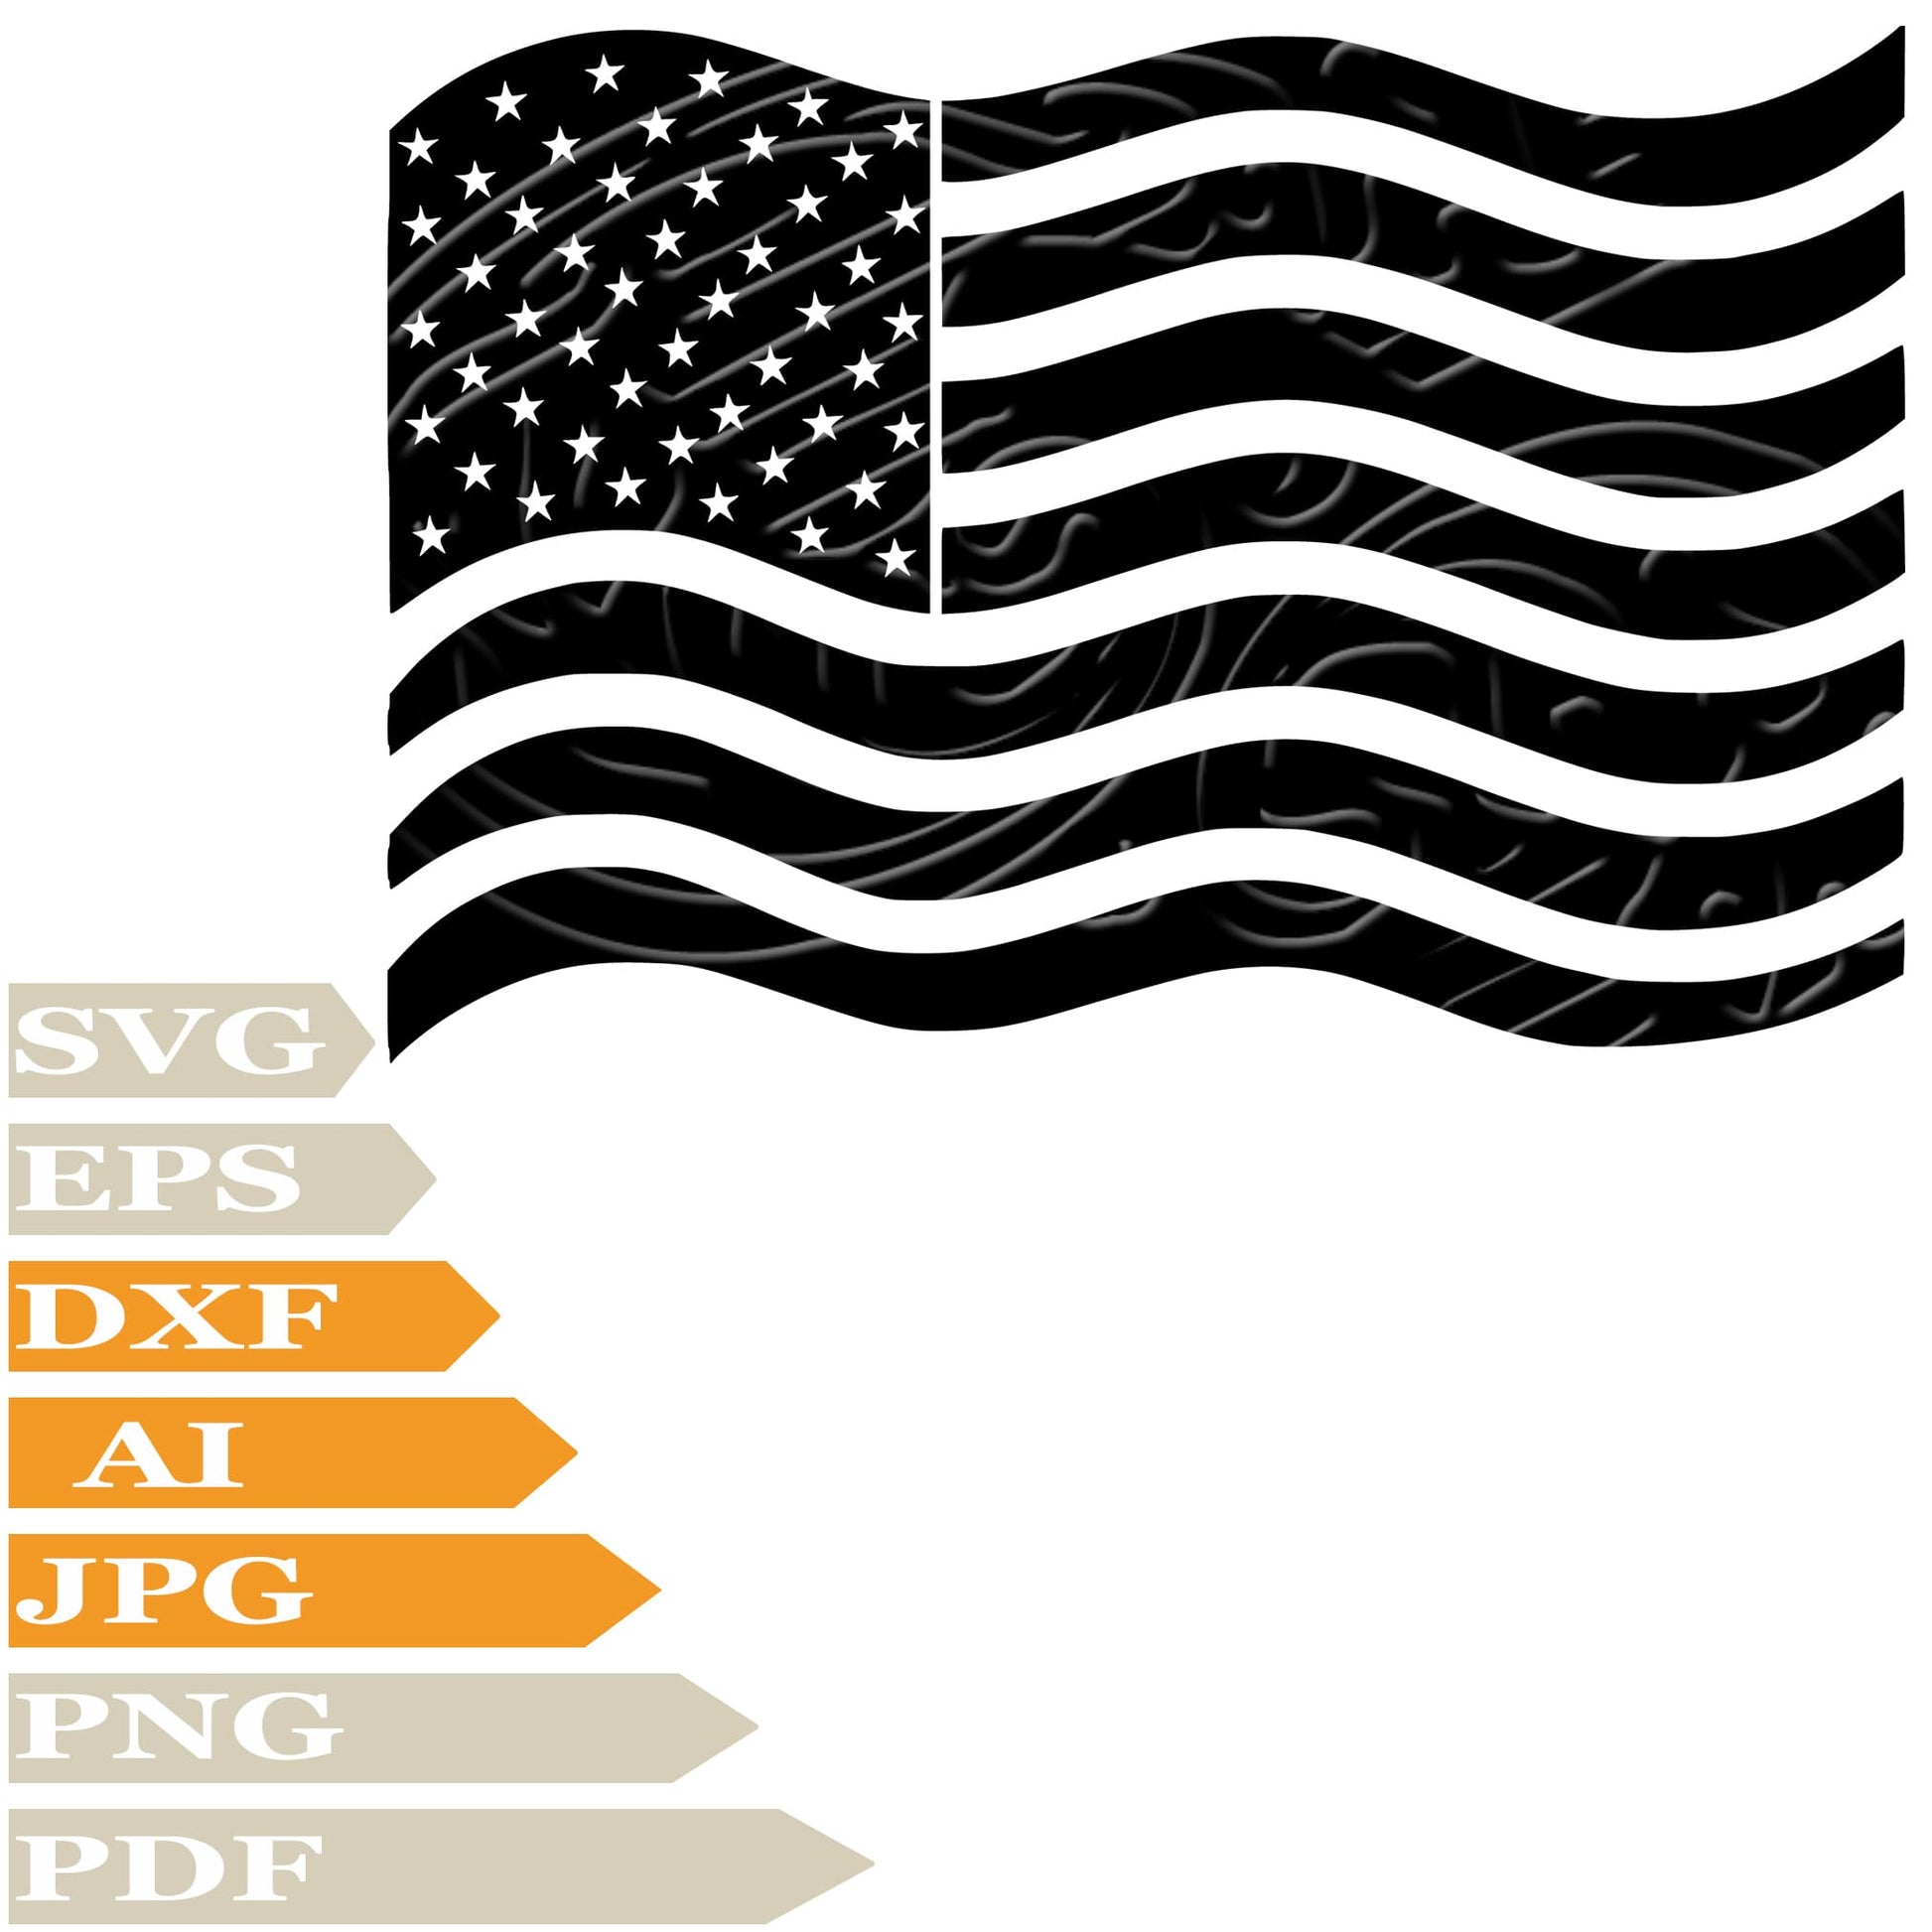 Usa Flag, Star Striped Flag Svg File, Image Cut, Png, For Tattoo, Silhouette, Digital Vector Download, Cut File, Clipart, For Cricut